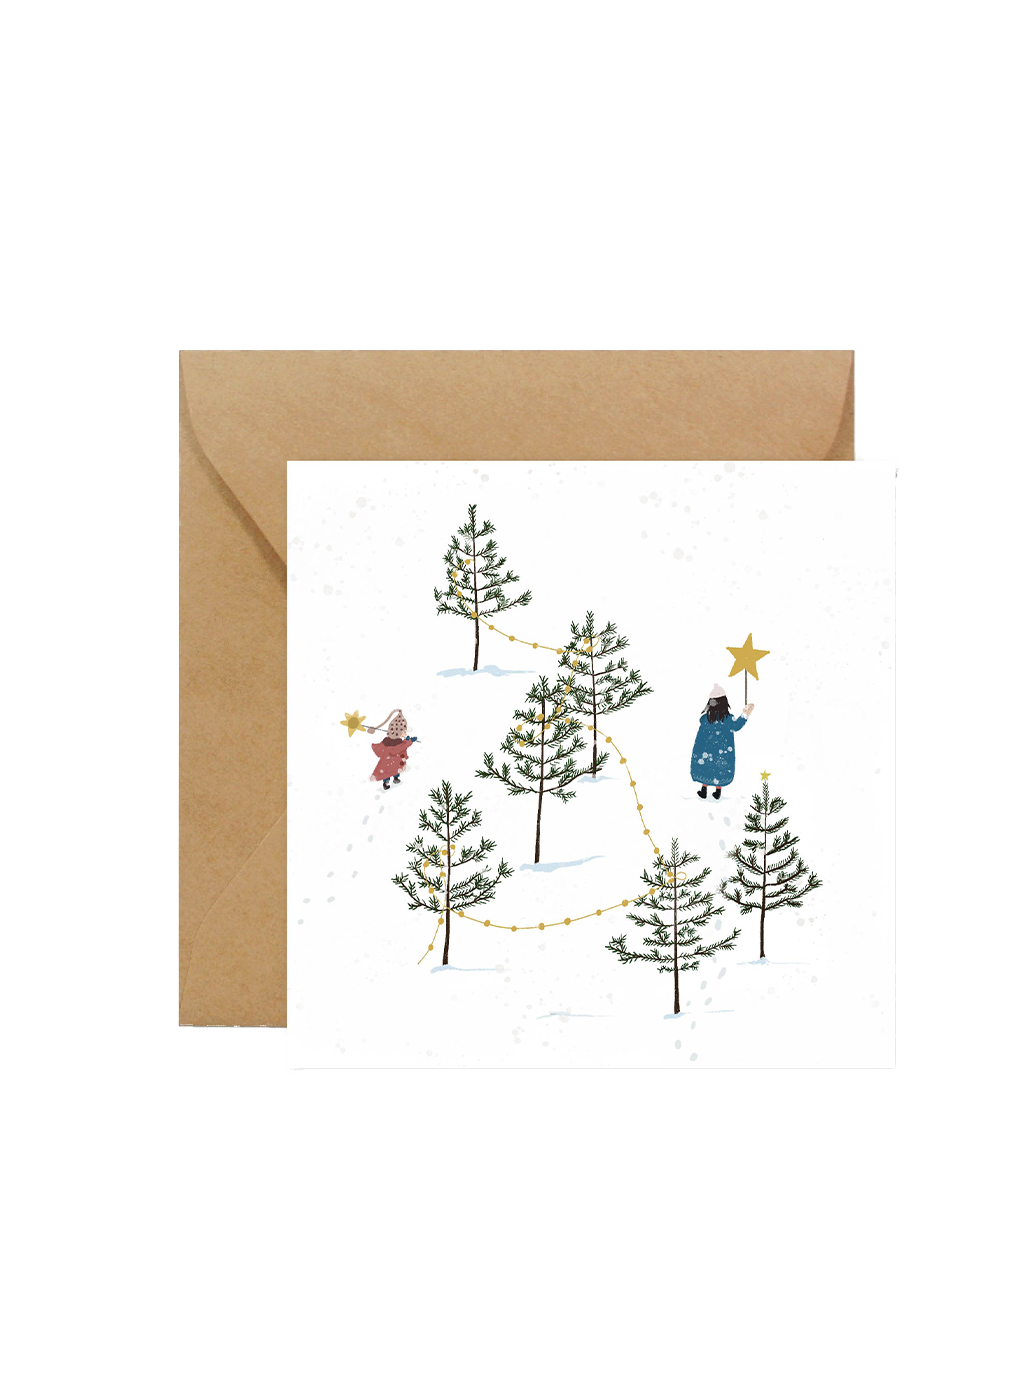 Greeting card with an envelope